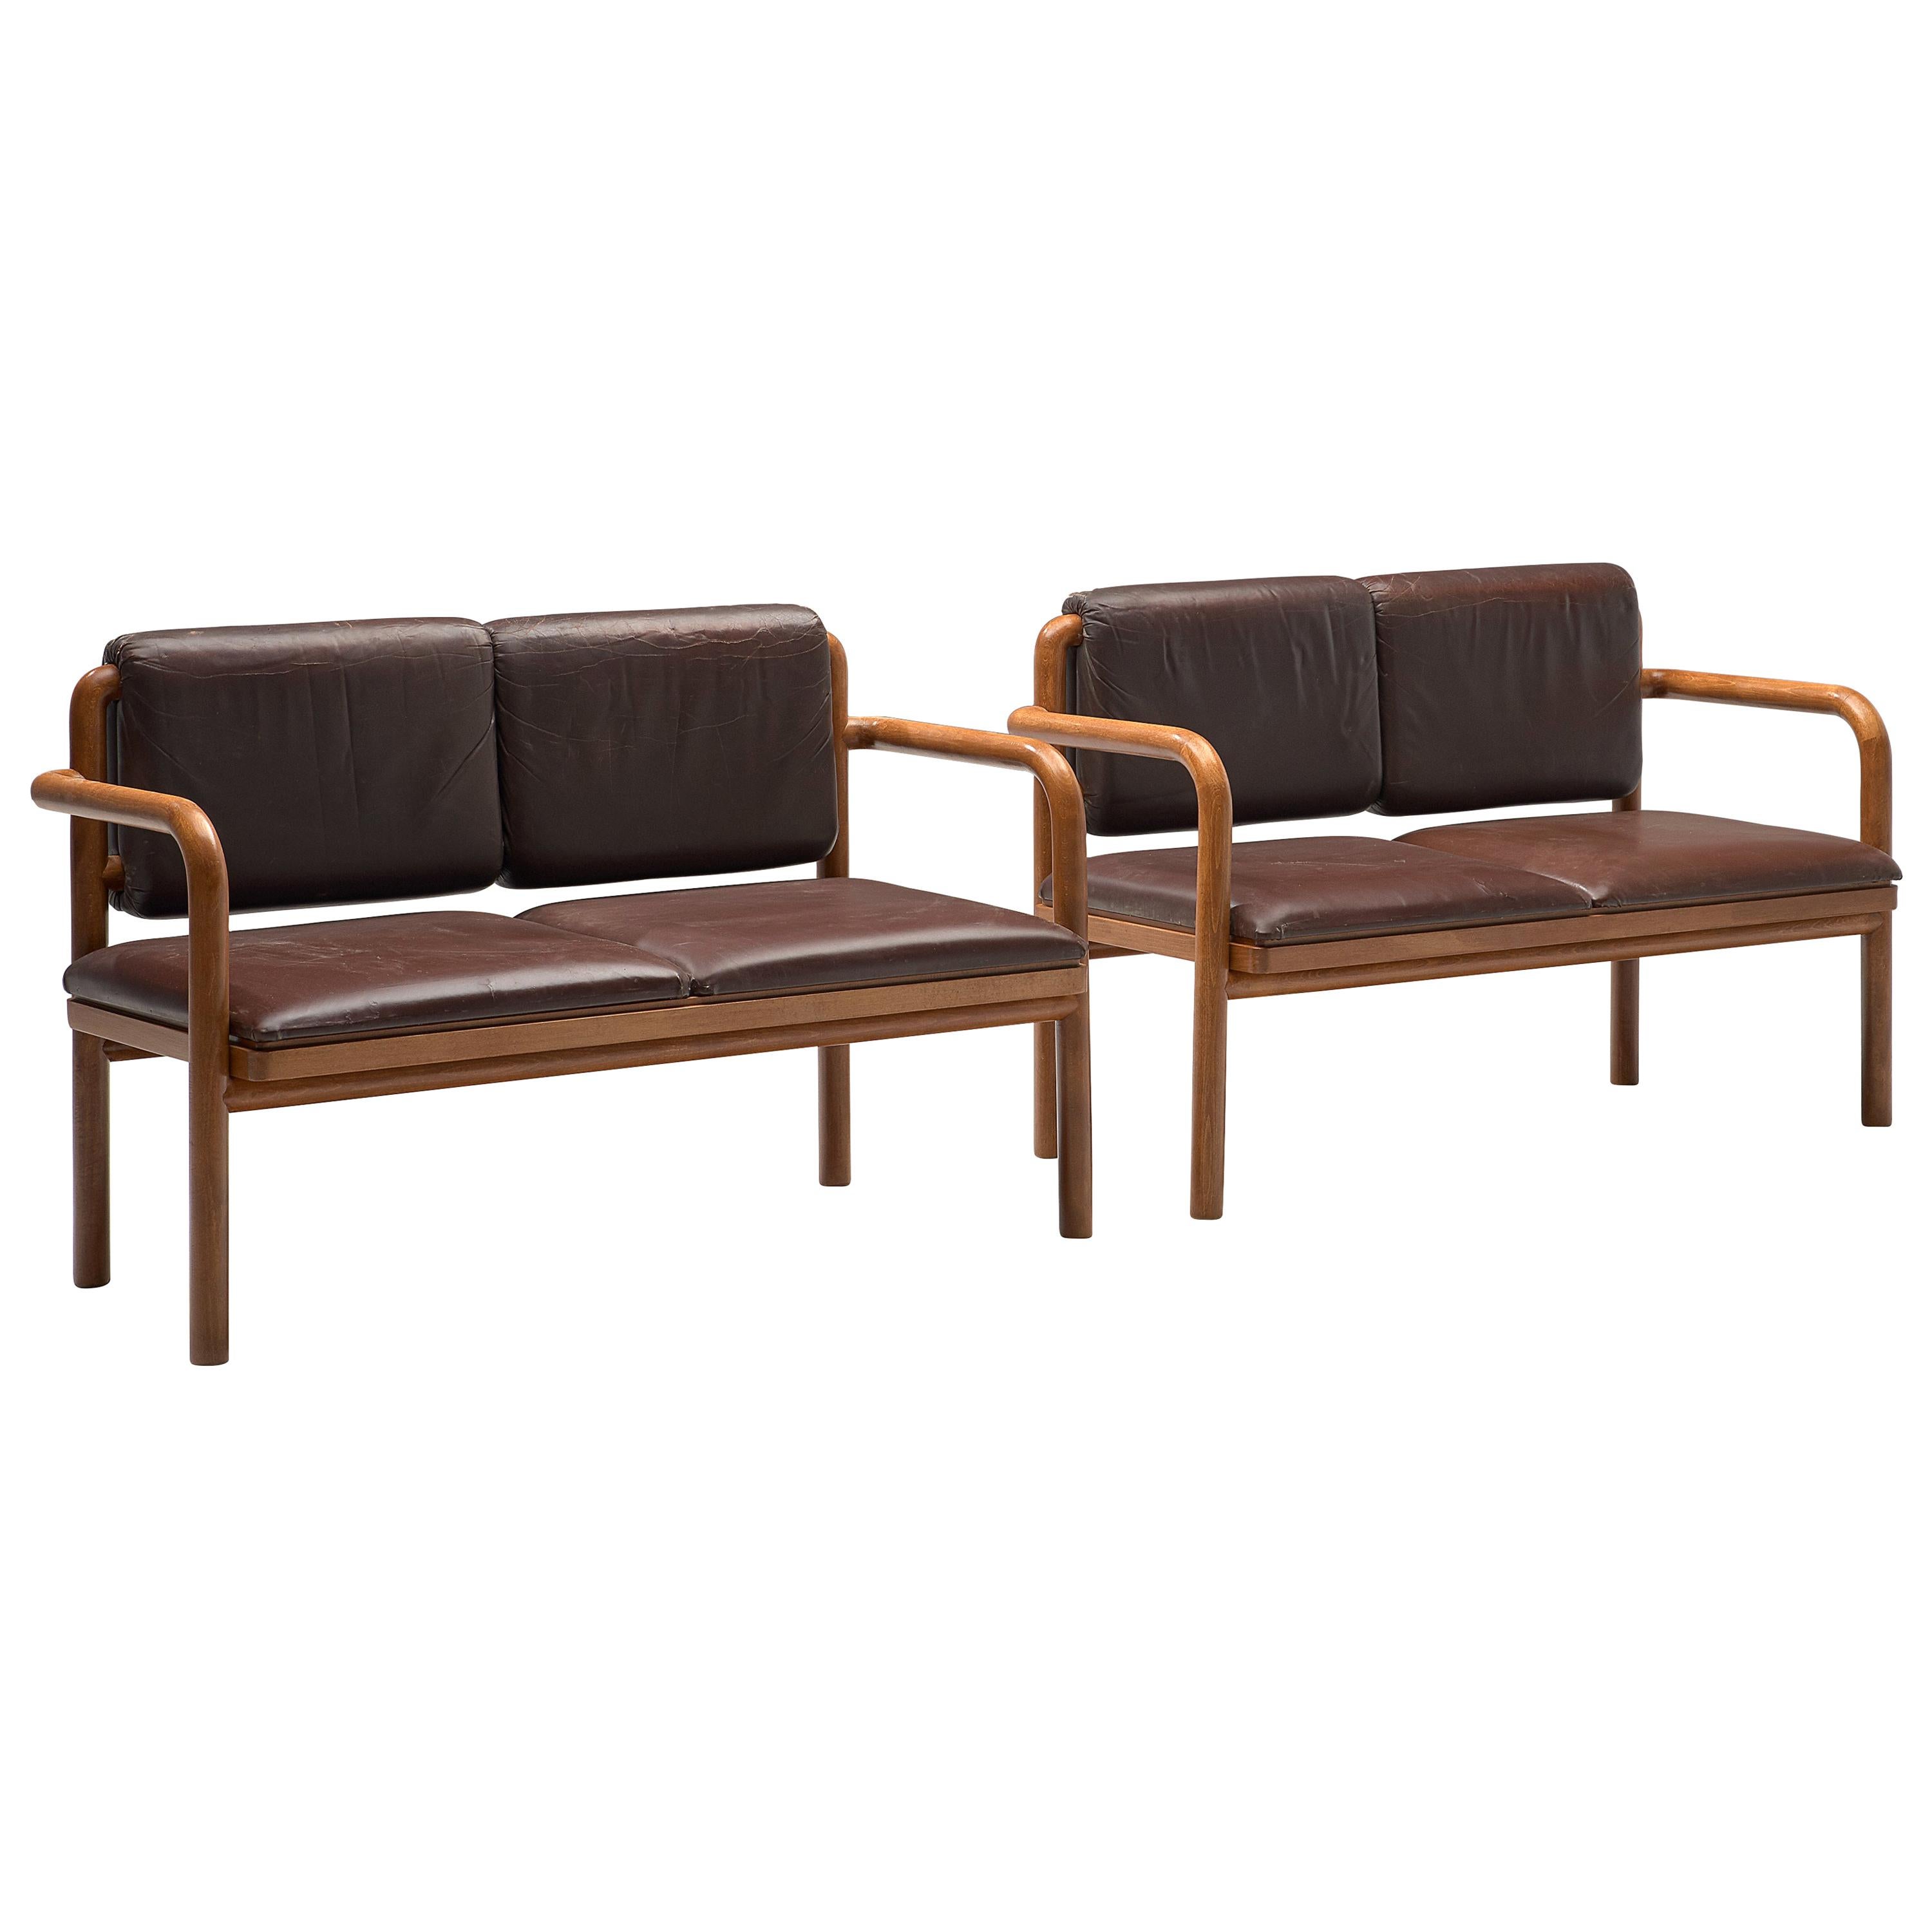 Pair of Benches by Ton in Bentwood